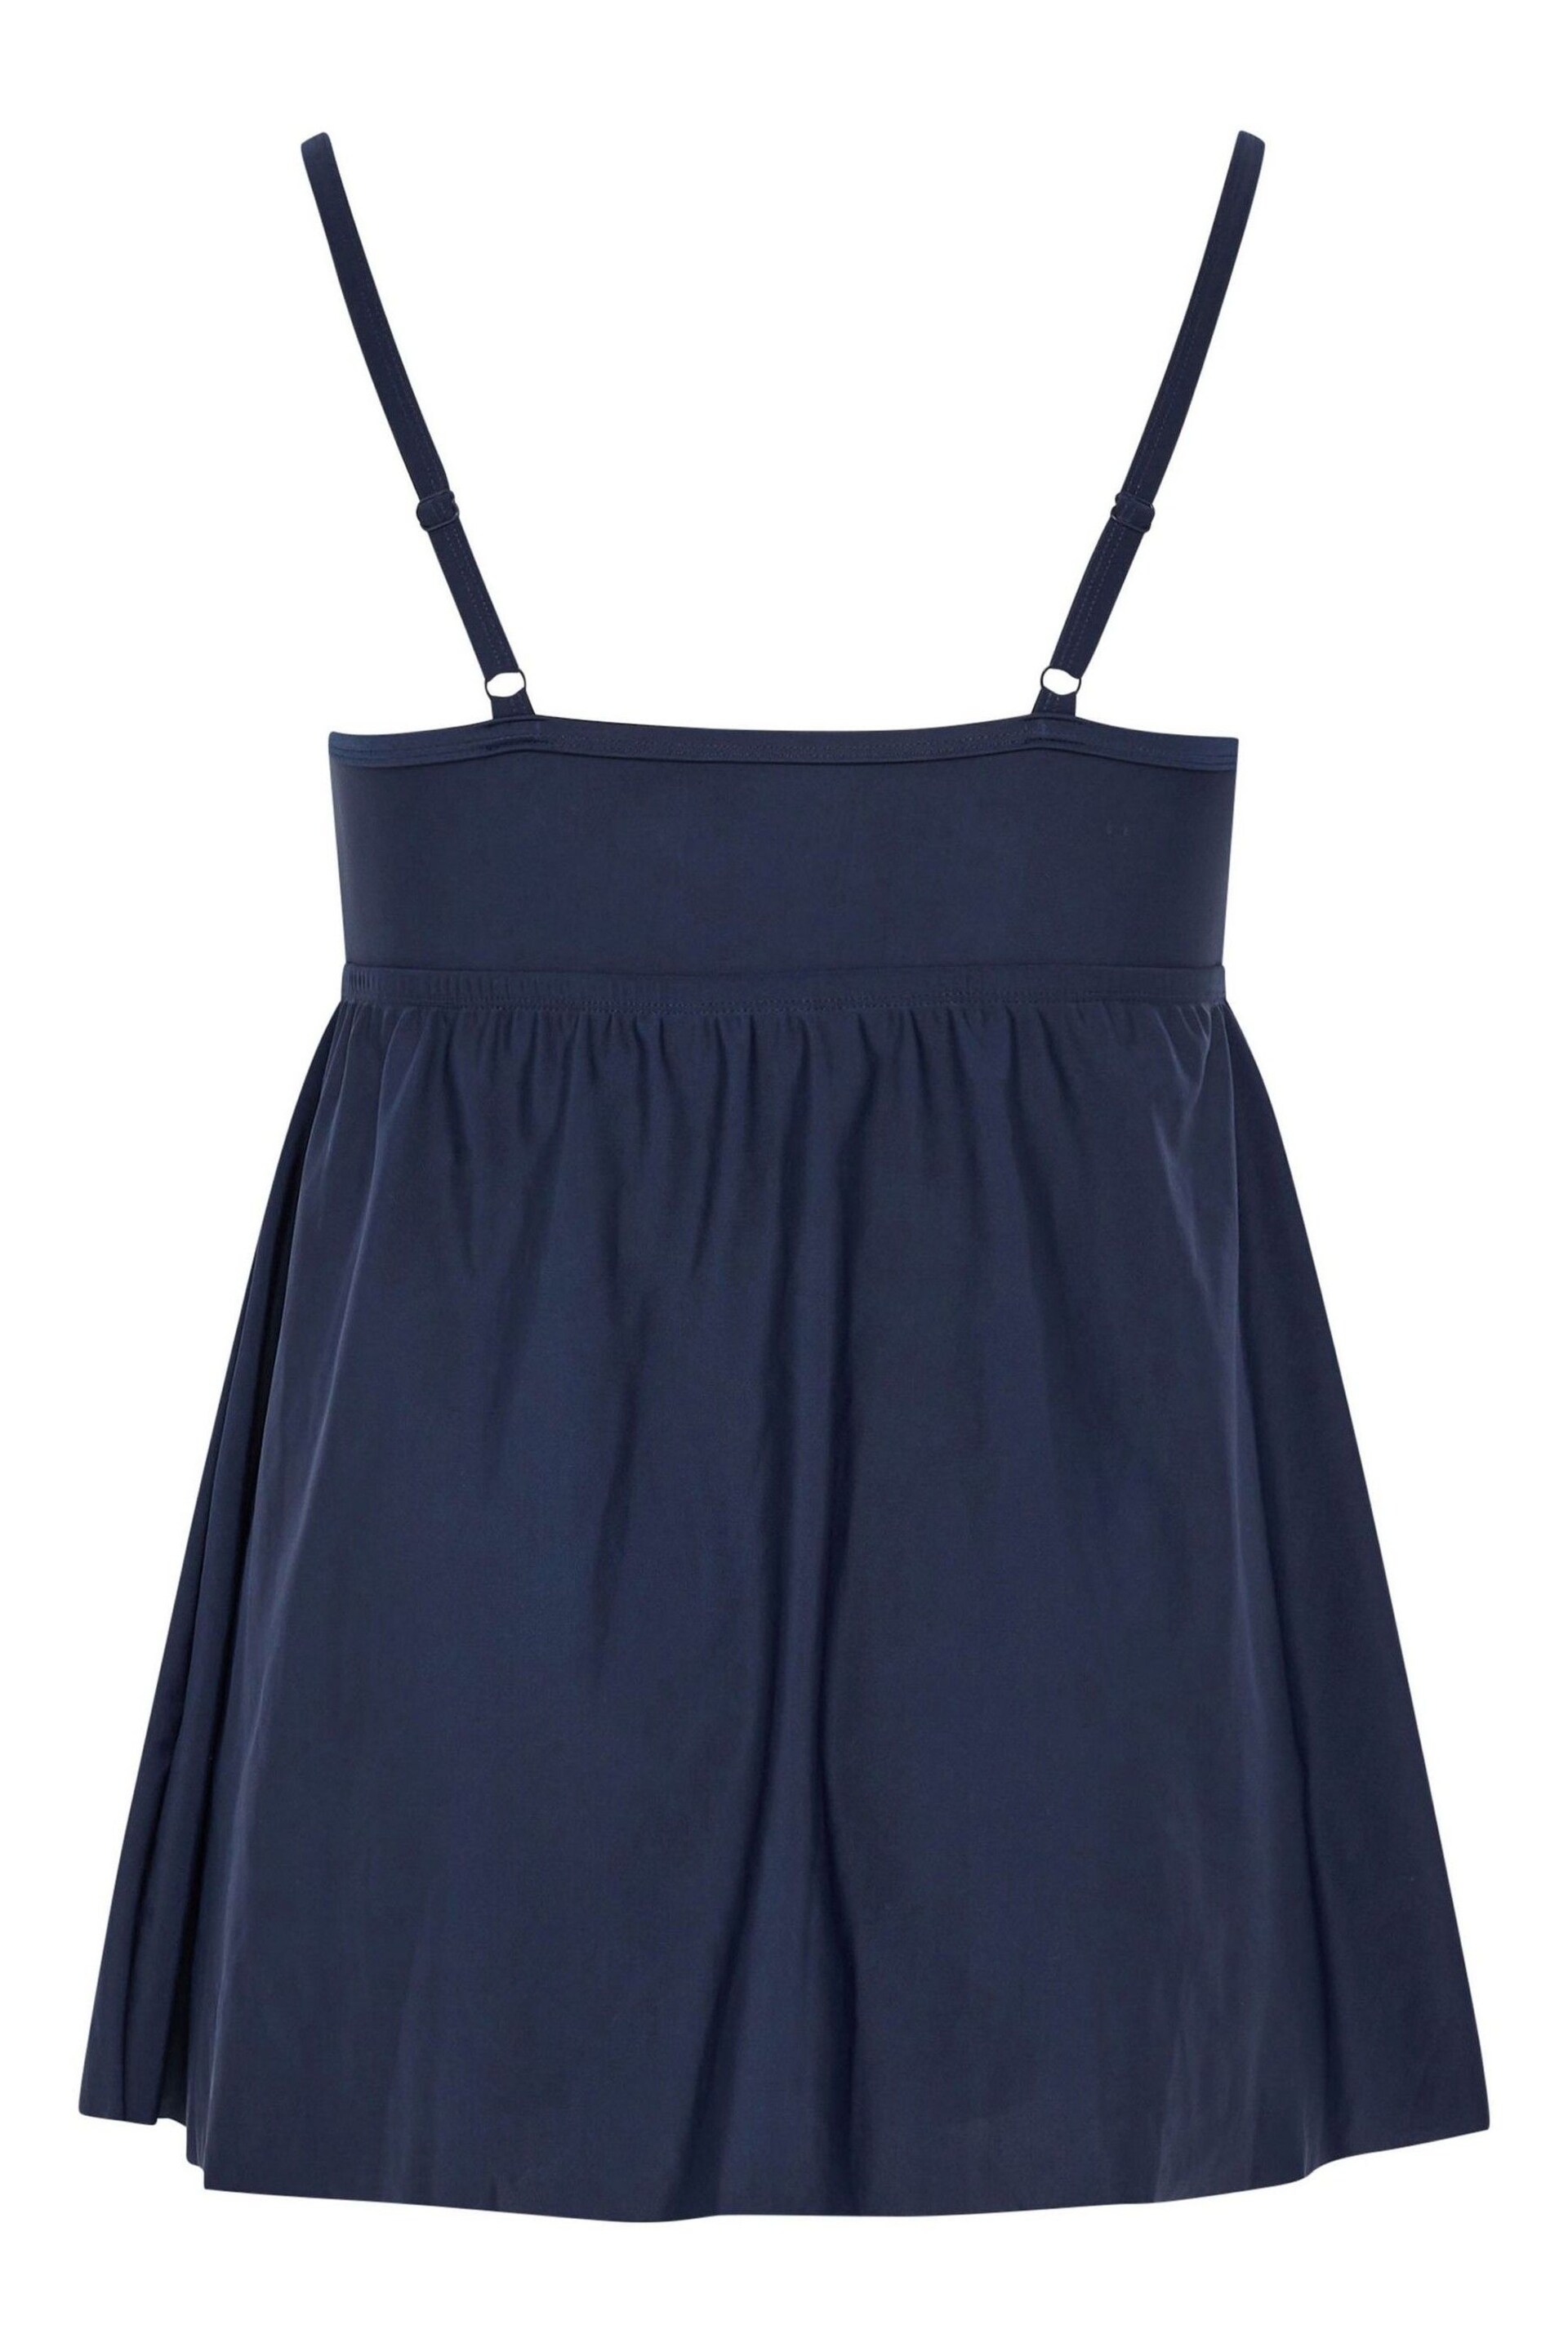 Yours Curve Blue Navy Swimdress - Image 6 of 6